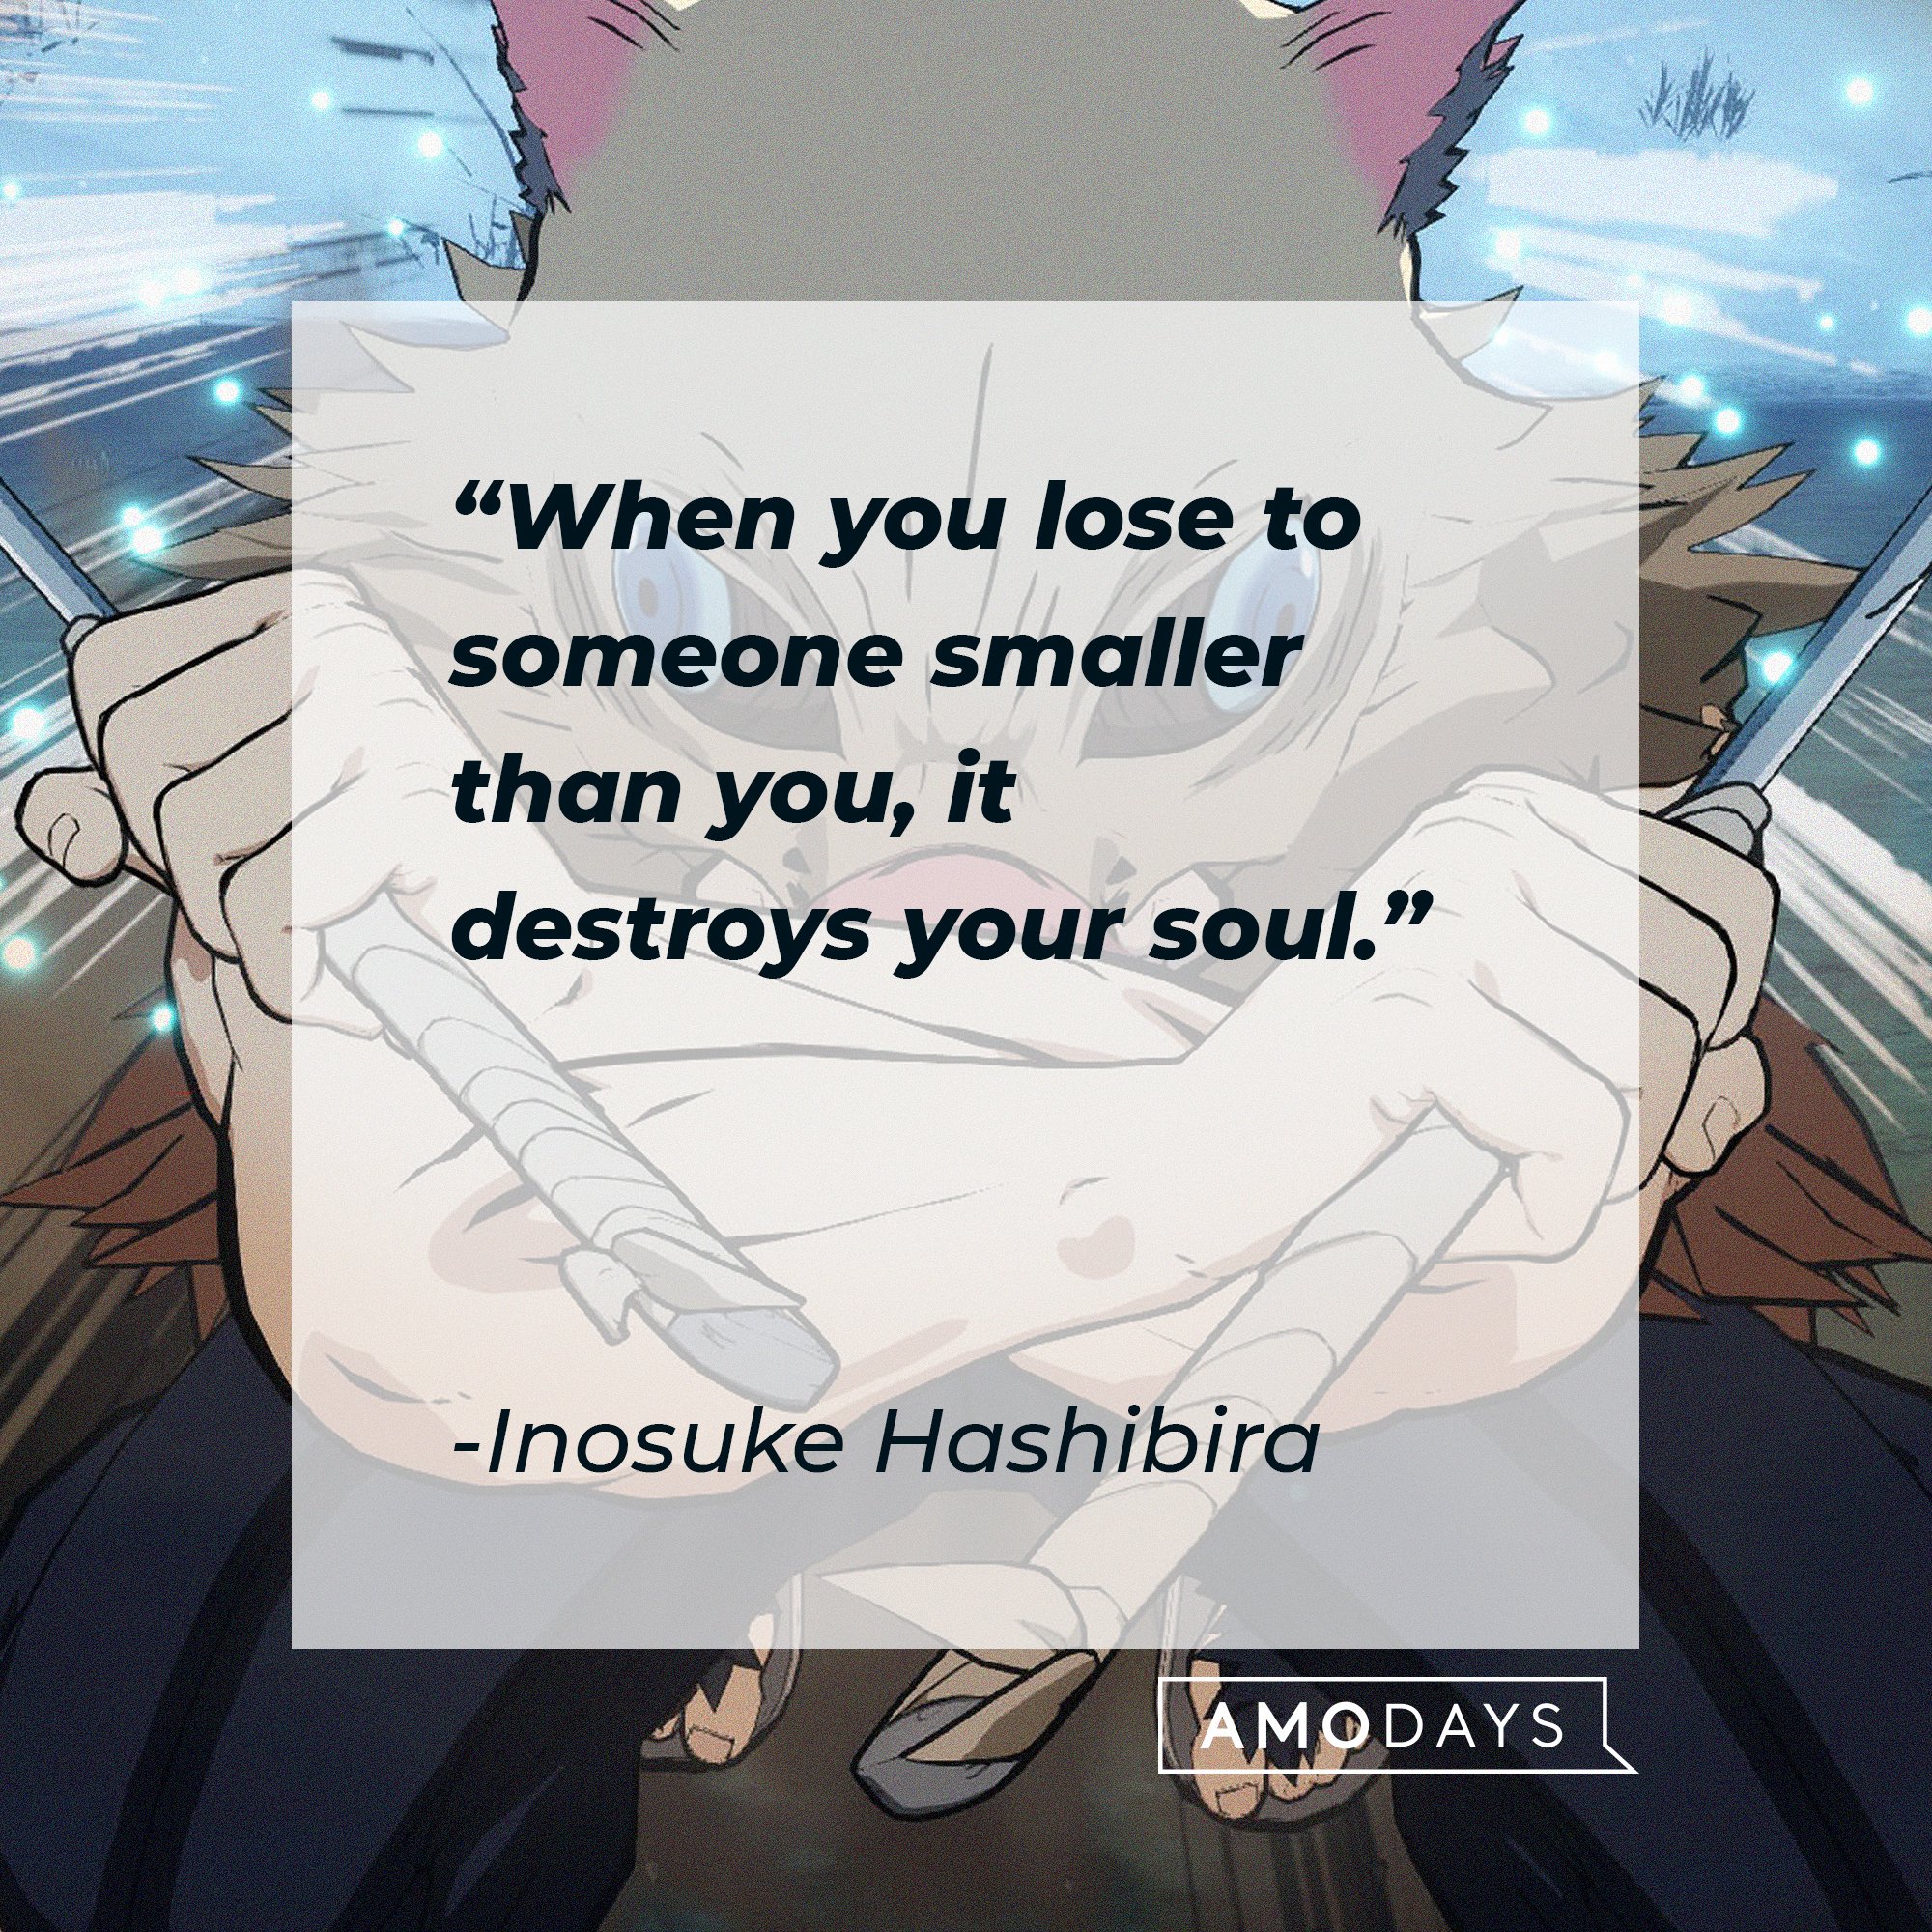  Inosuke Hashibira’s quote: "When you lose to someone smaller than you, it destroys your soul." | Image: AmoDays